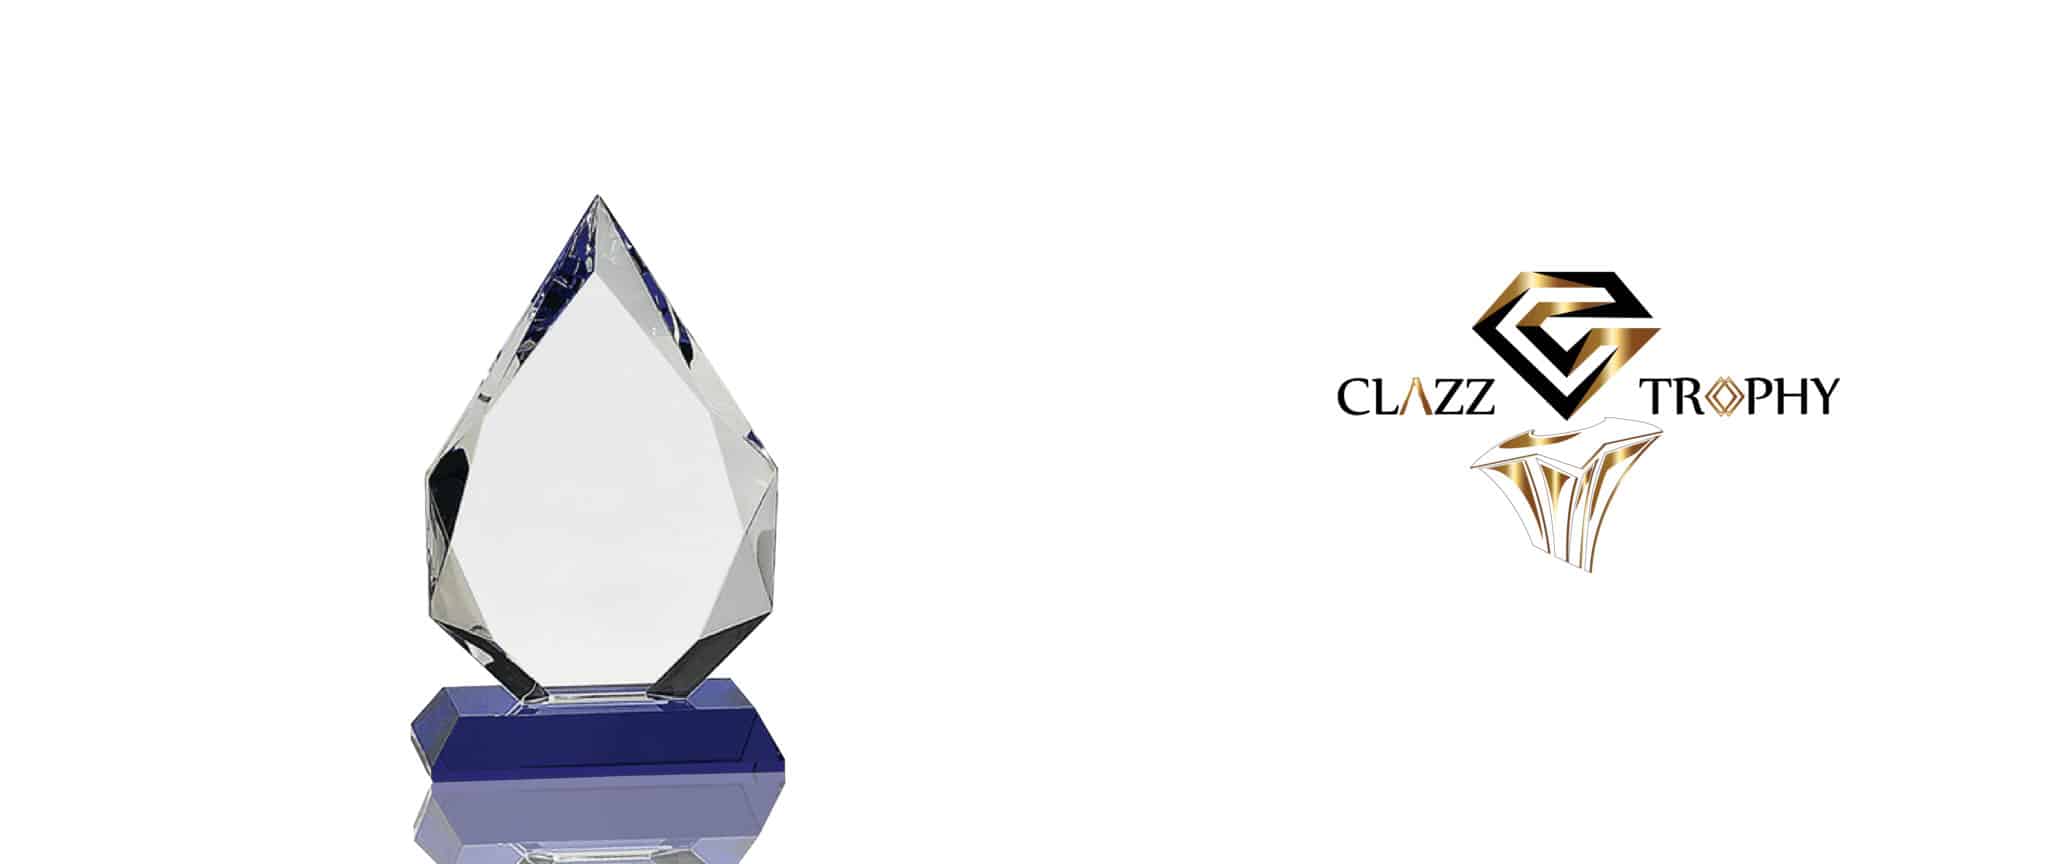 Plaque Malaysia at Clazz Trophy Malaysia | #1 Rated Trophy Supplier in Malaysia